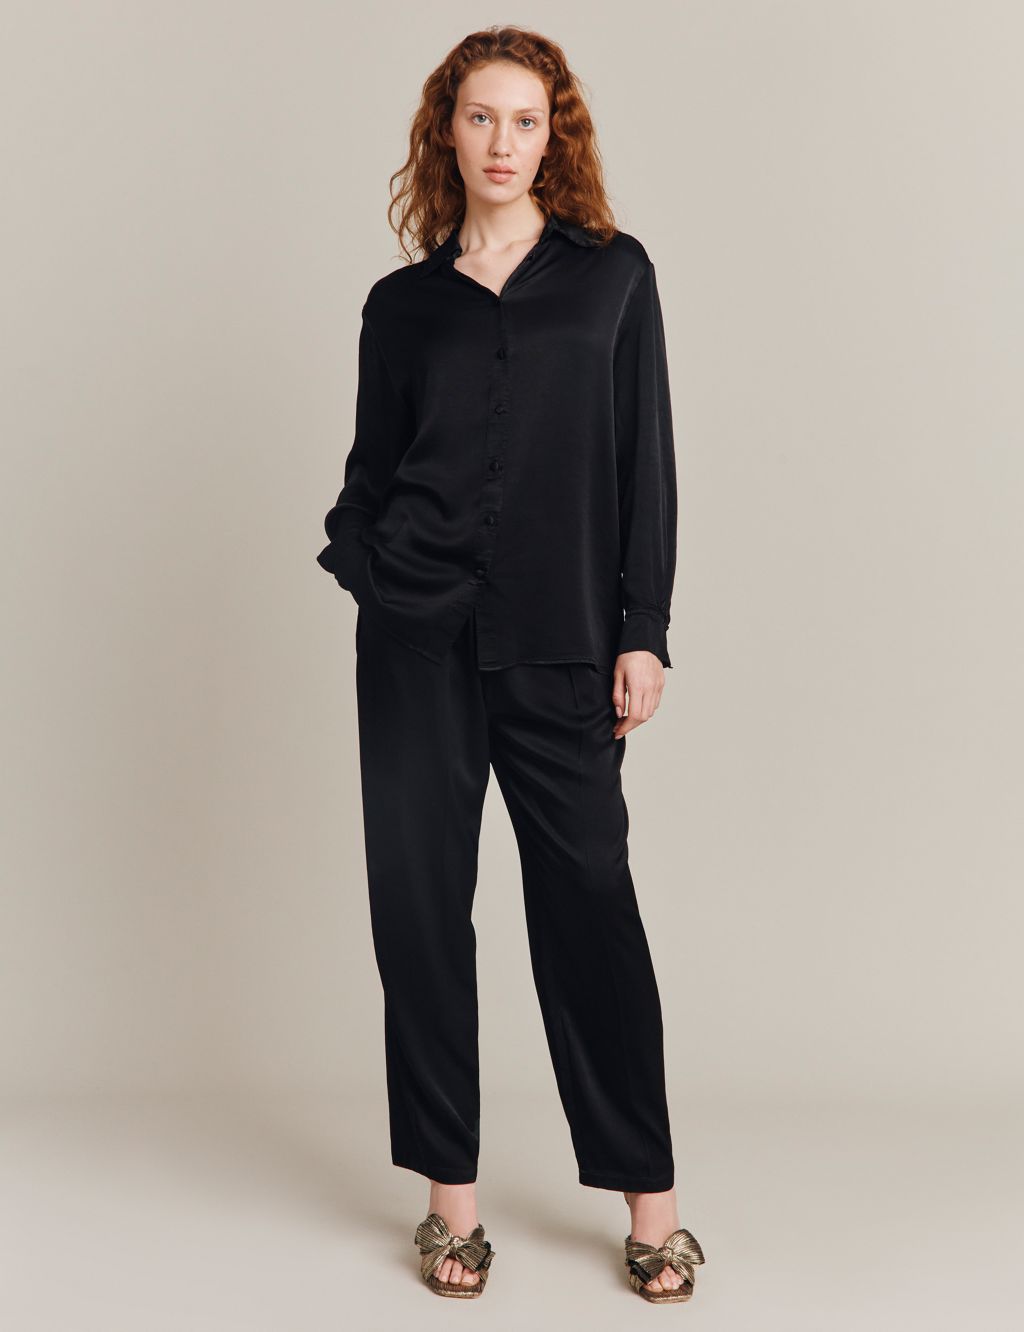 Satin Pleat Front Tapered Trousers image 1